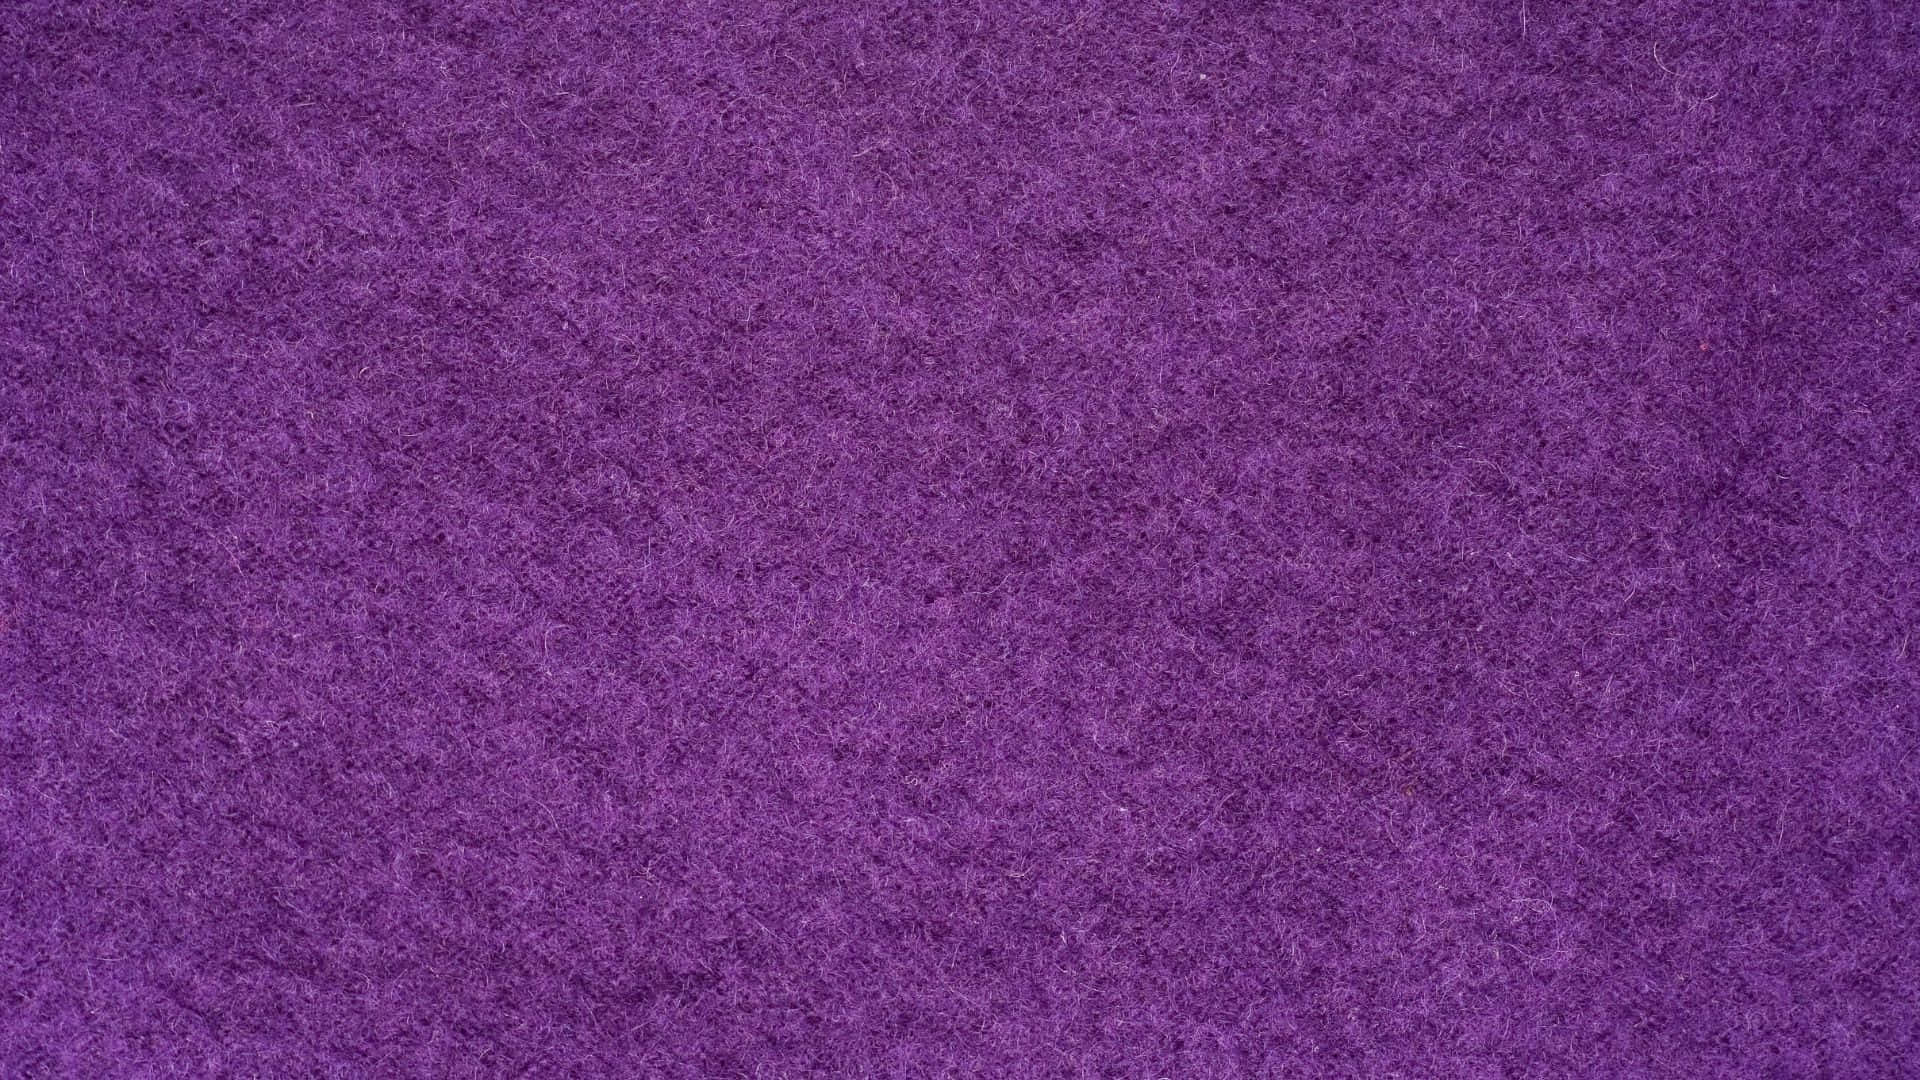 Sumptuously Soft Purple Wool Wallpaper